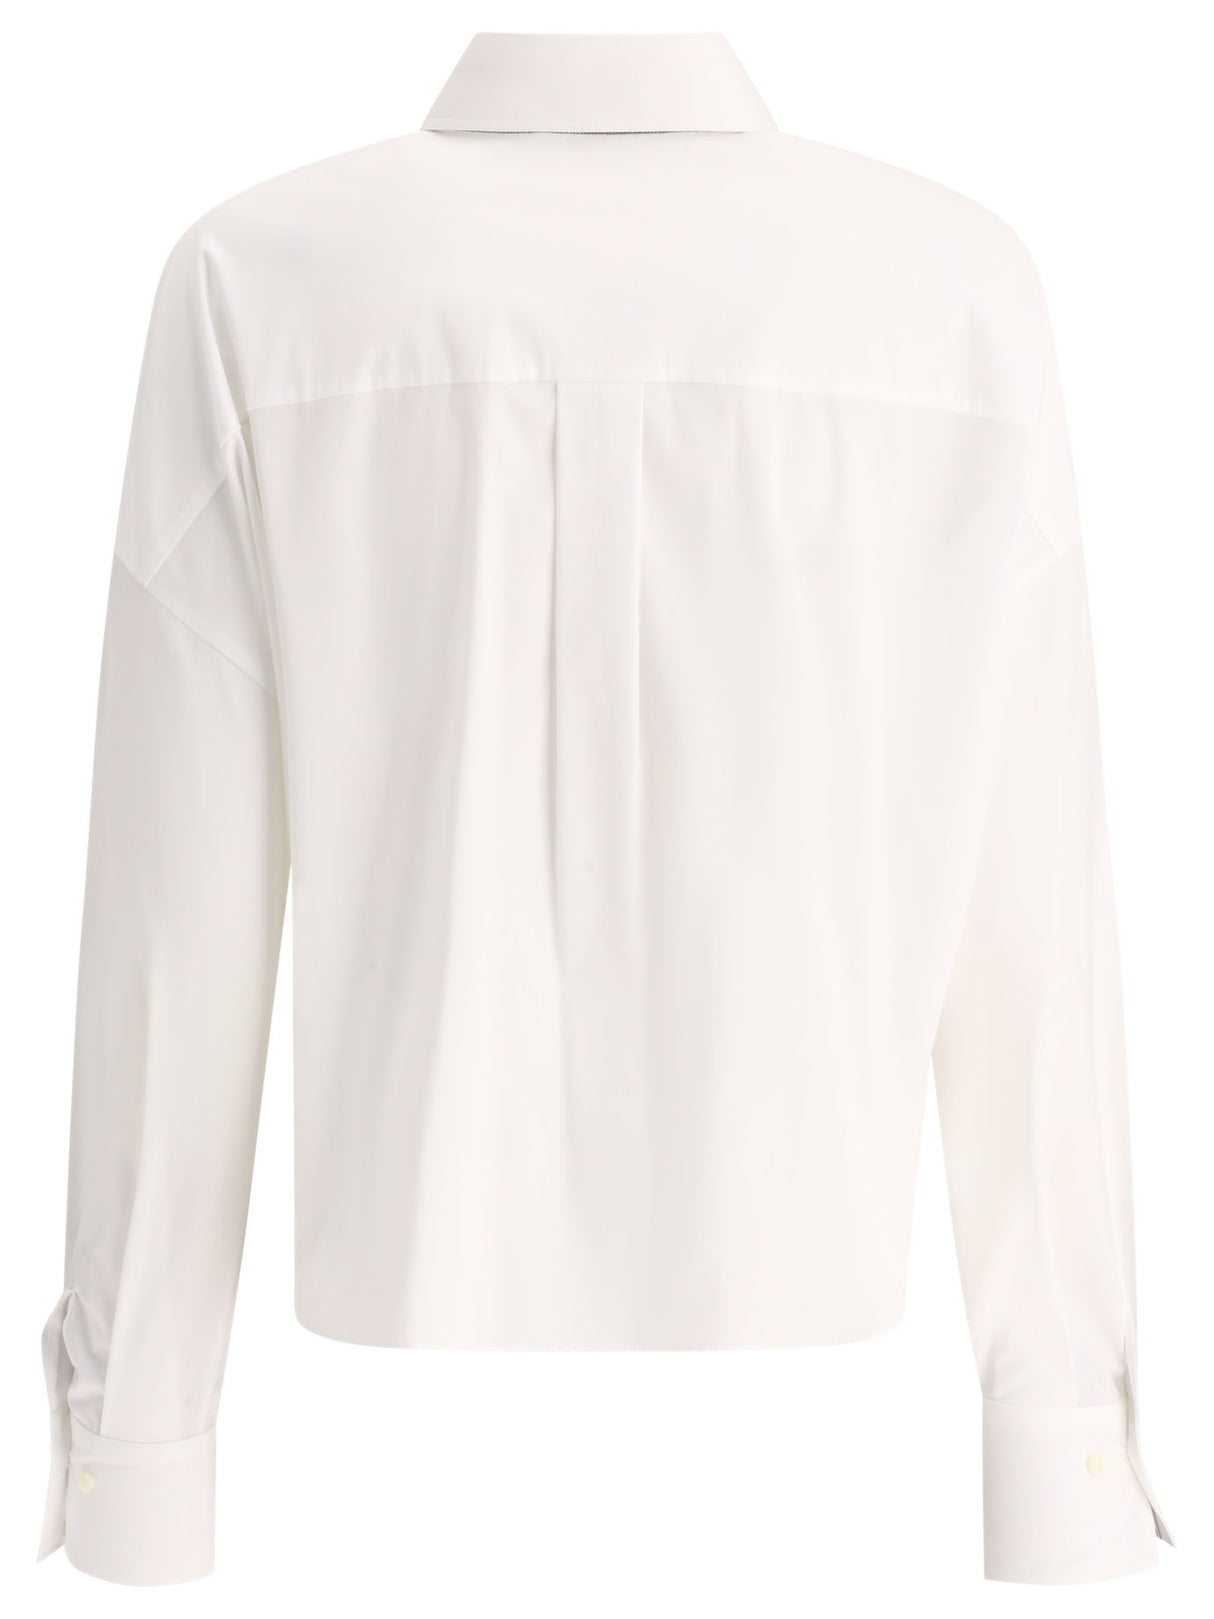 BRUNELLO CUCINELLI Classic White Band-Collar Shirt for Women - SS24 Collection